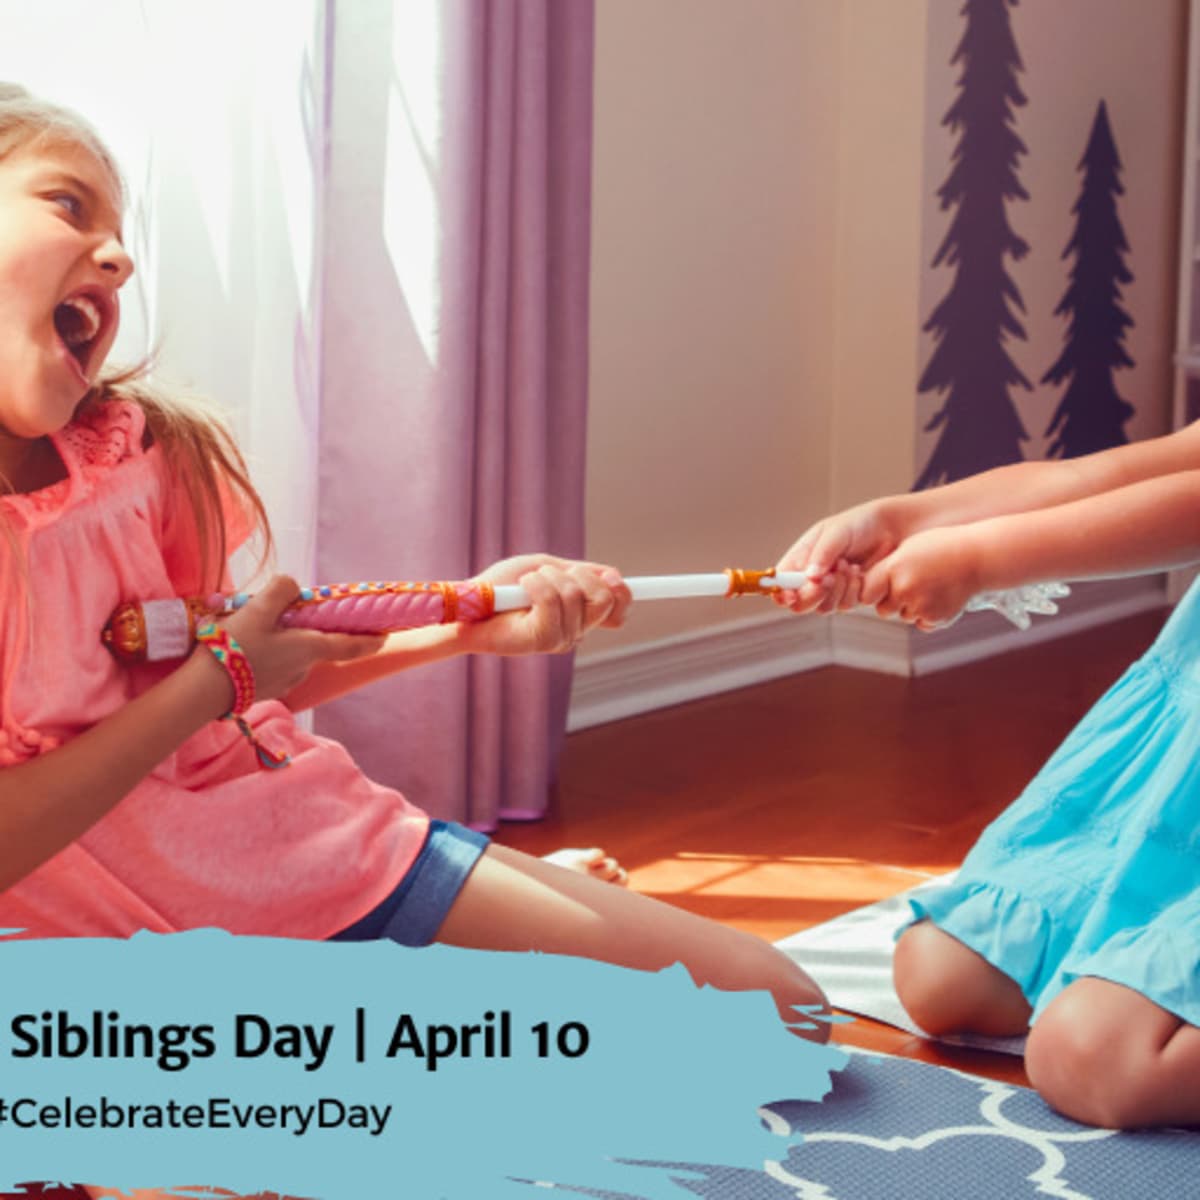 Fair Oaks Mall - Today is National Siblings Day so we want to give